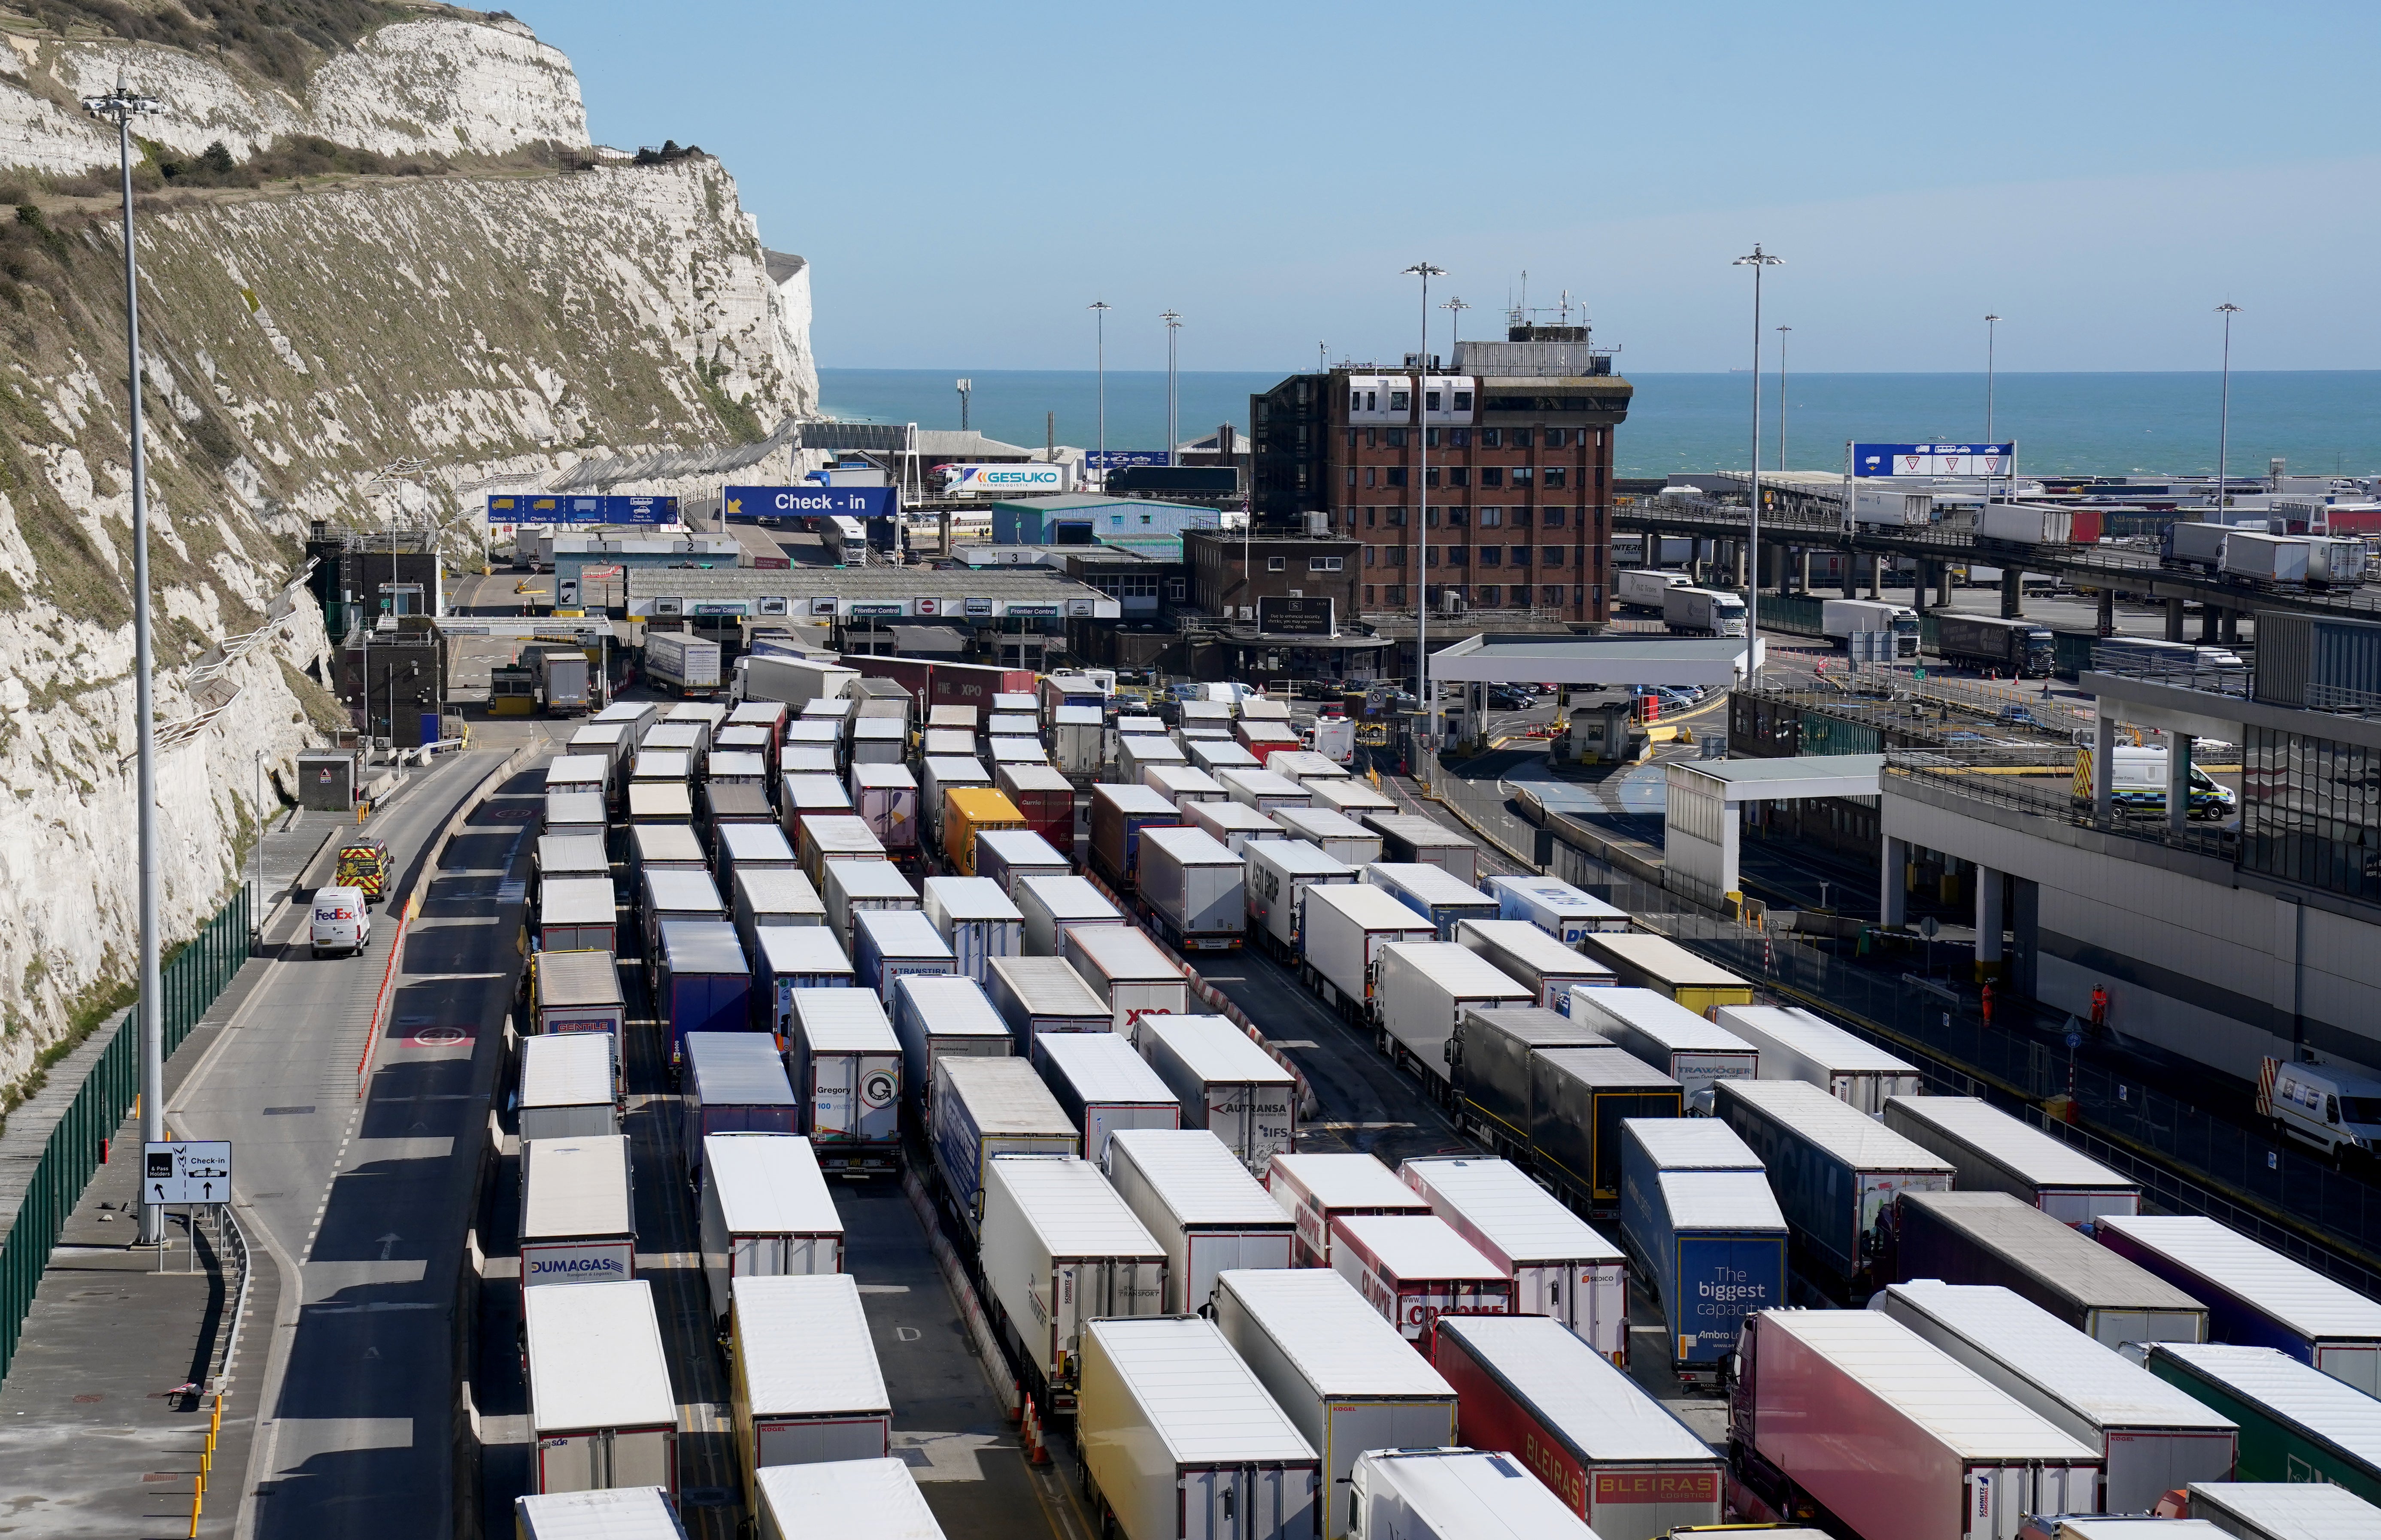 Lorries waiting to check in at the Port of Dover in Kent (Gareth Fuller/PA)